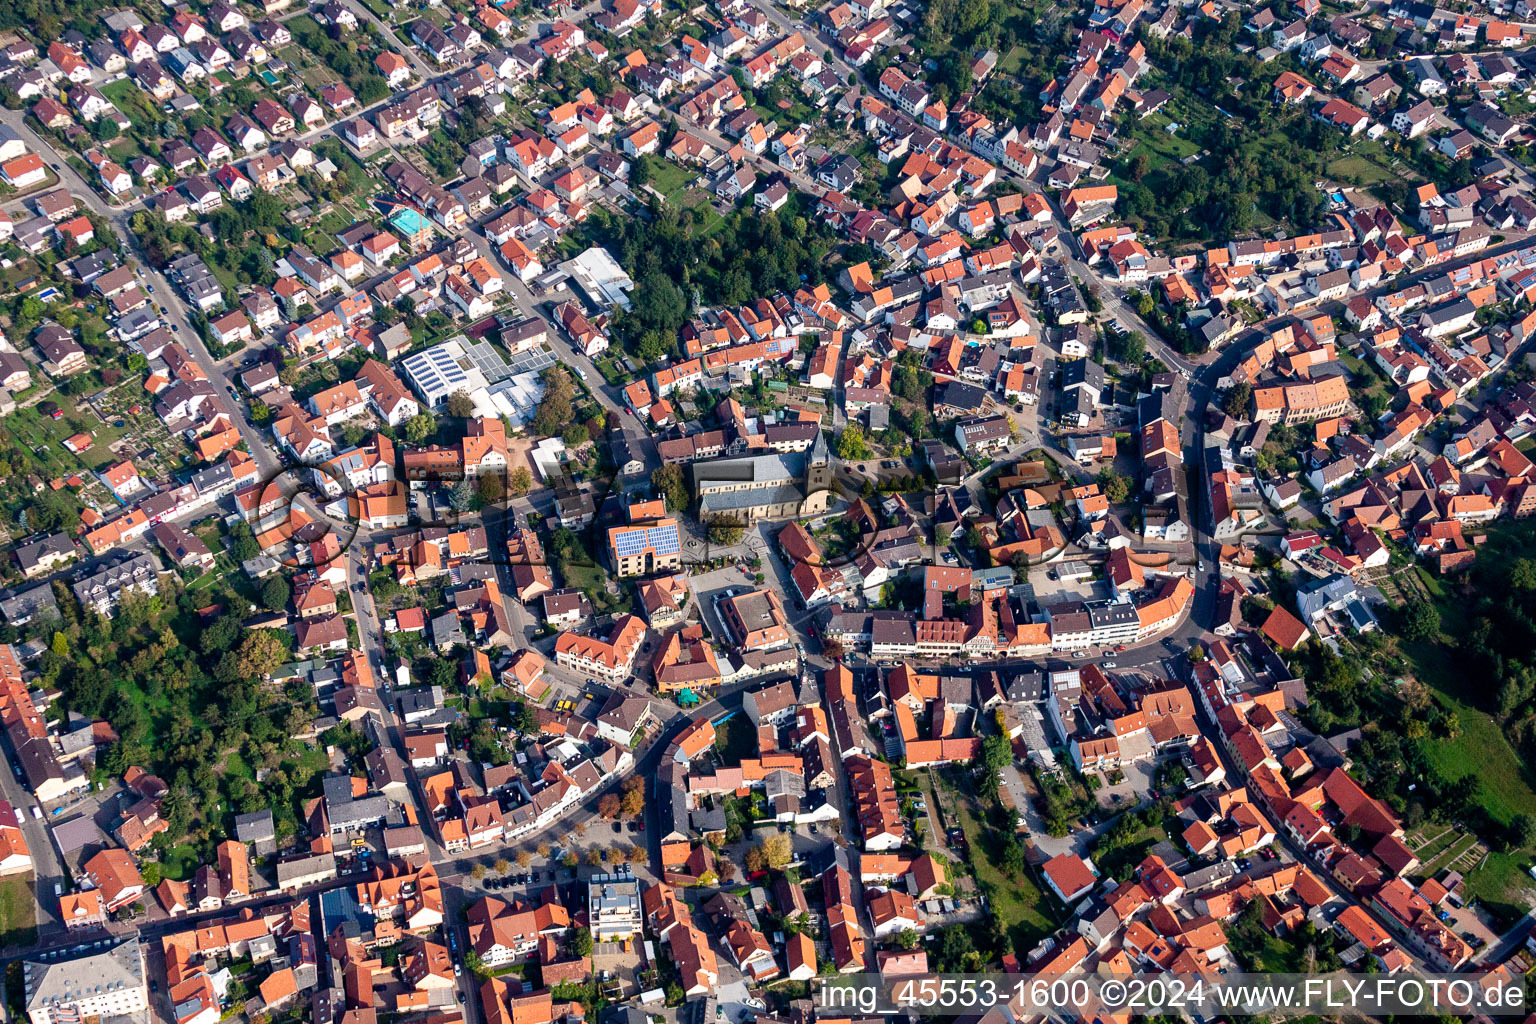 Aerial view of Church building in Old Town- center of downtown in Oestringen in the state Baden-Wurttemberg, Germany